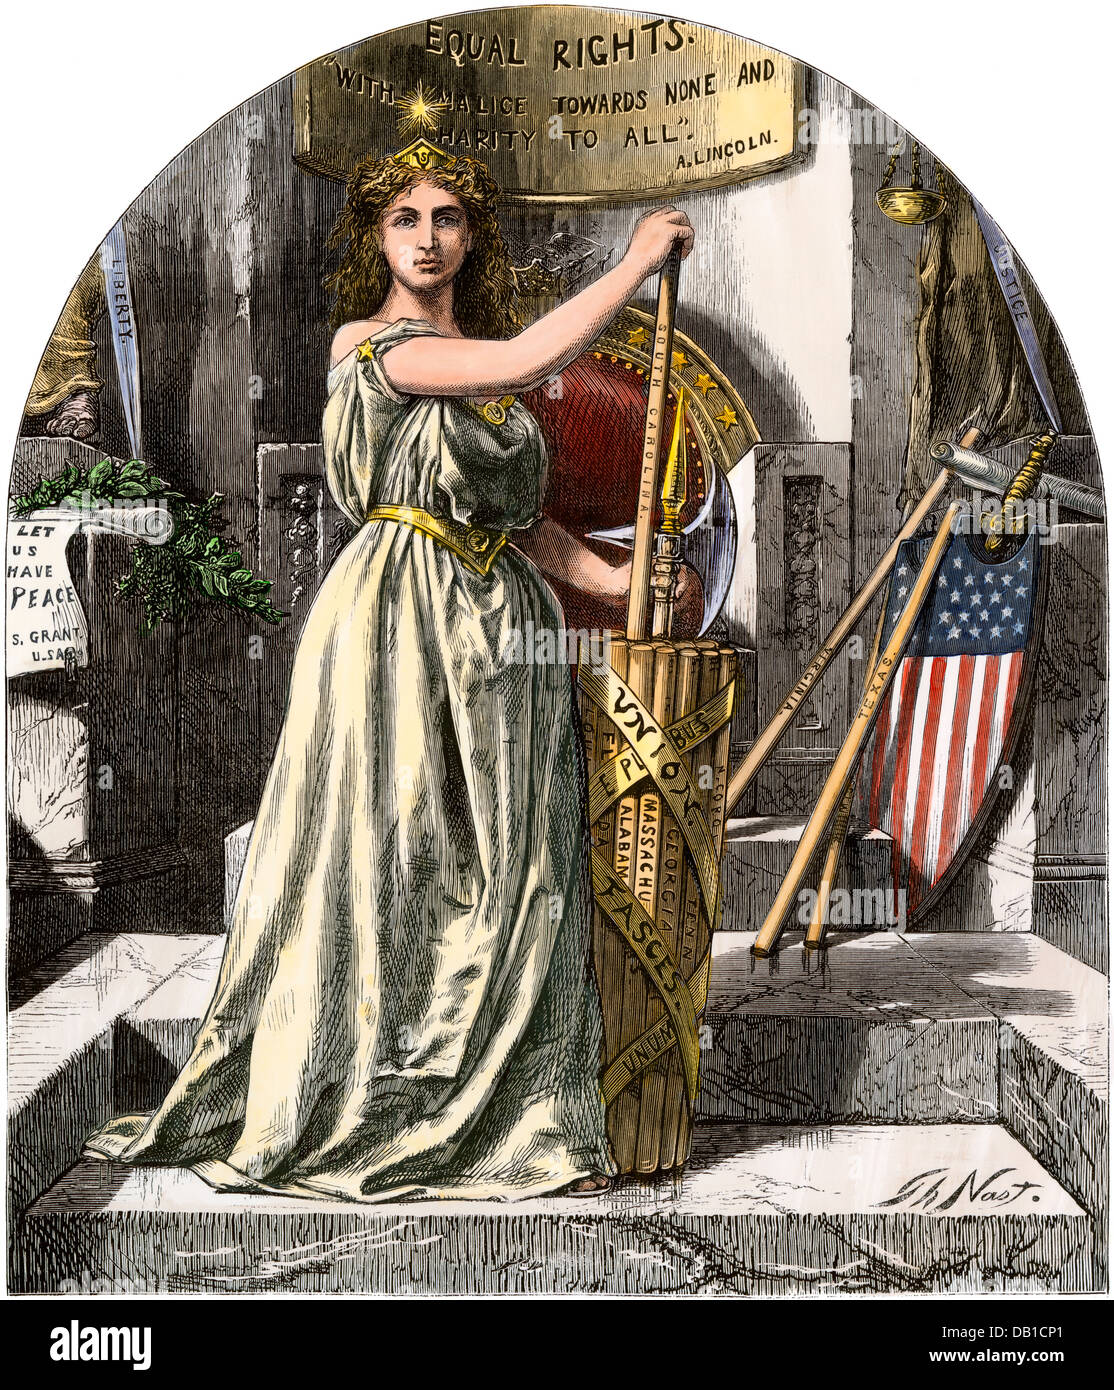 Reconstruction depicted as equal rights reform, 1868. Hand-colored woodcut Stock Photo